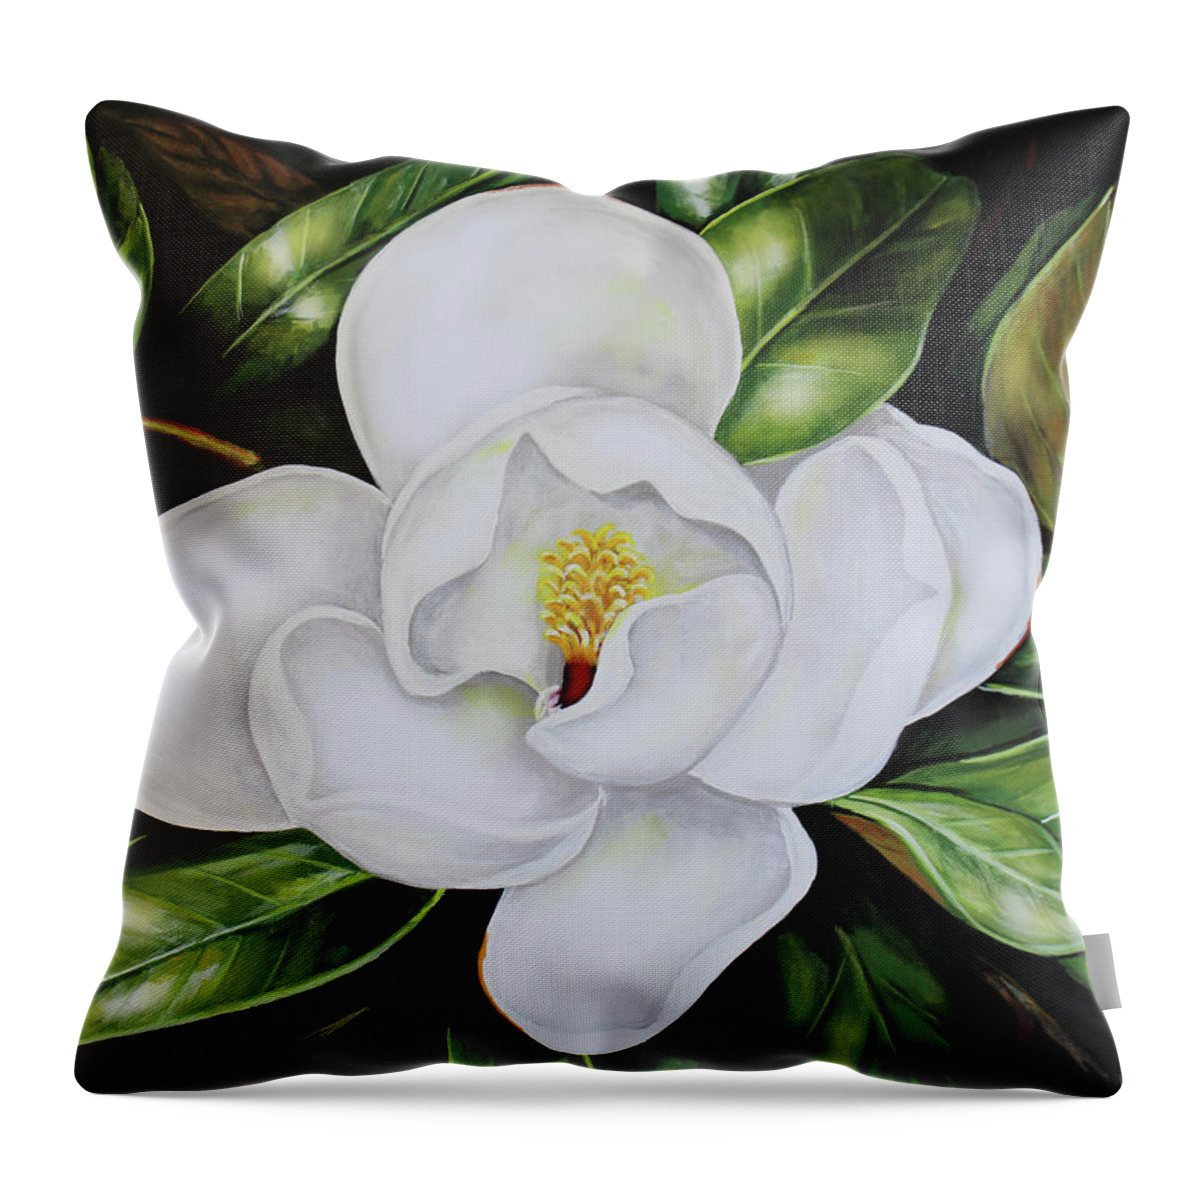 Magnolia Throw Pillow featuring the painting Magnolia Blossom by Karl Wagner